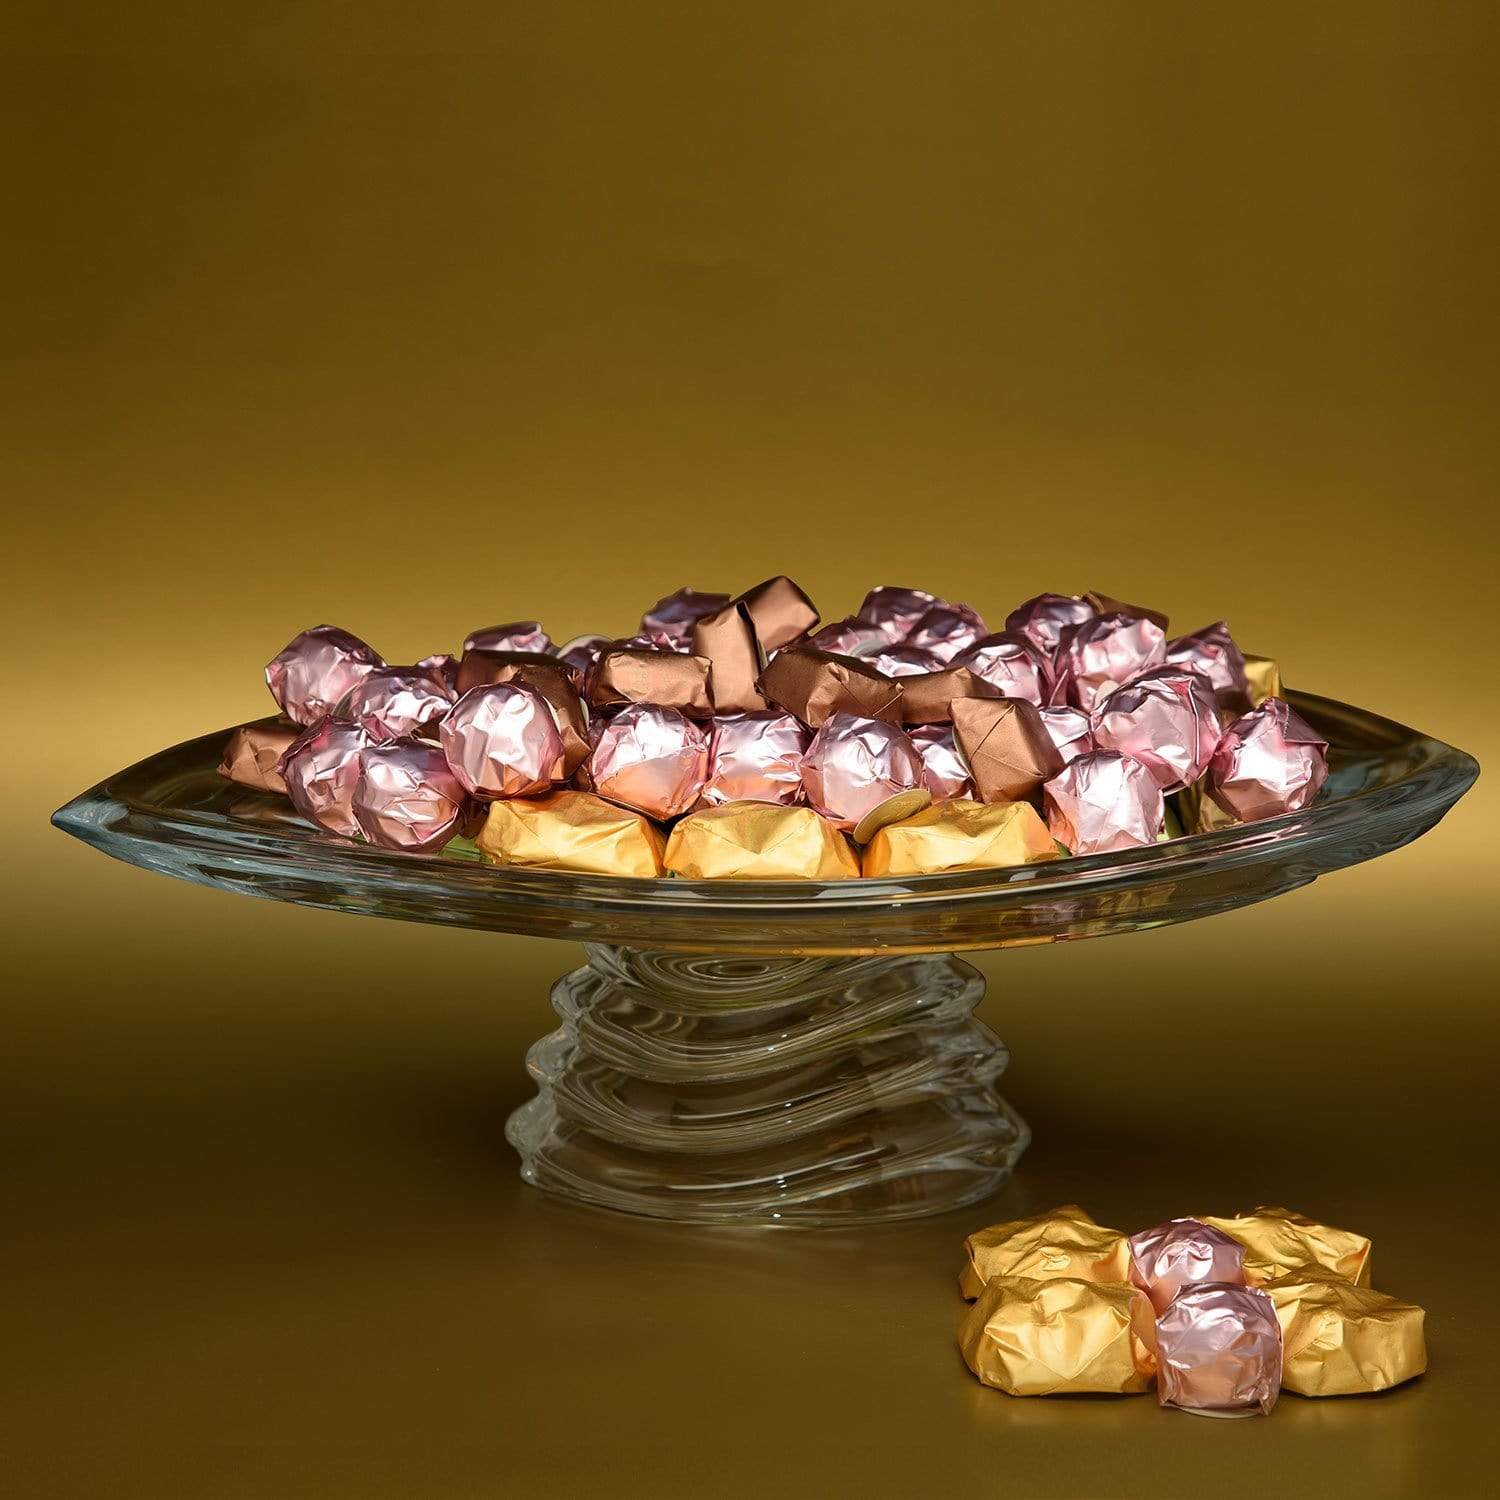 Bohemia Crystal Glass Wave Footed Plate with 1kg chocolate - 36 cm - 5391195 - Jashanmal Home